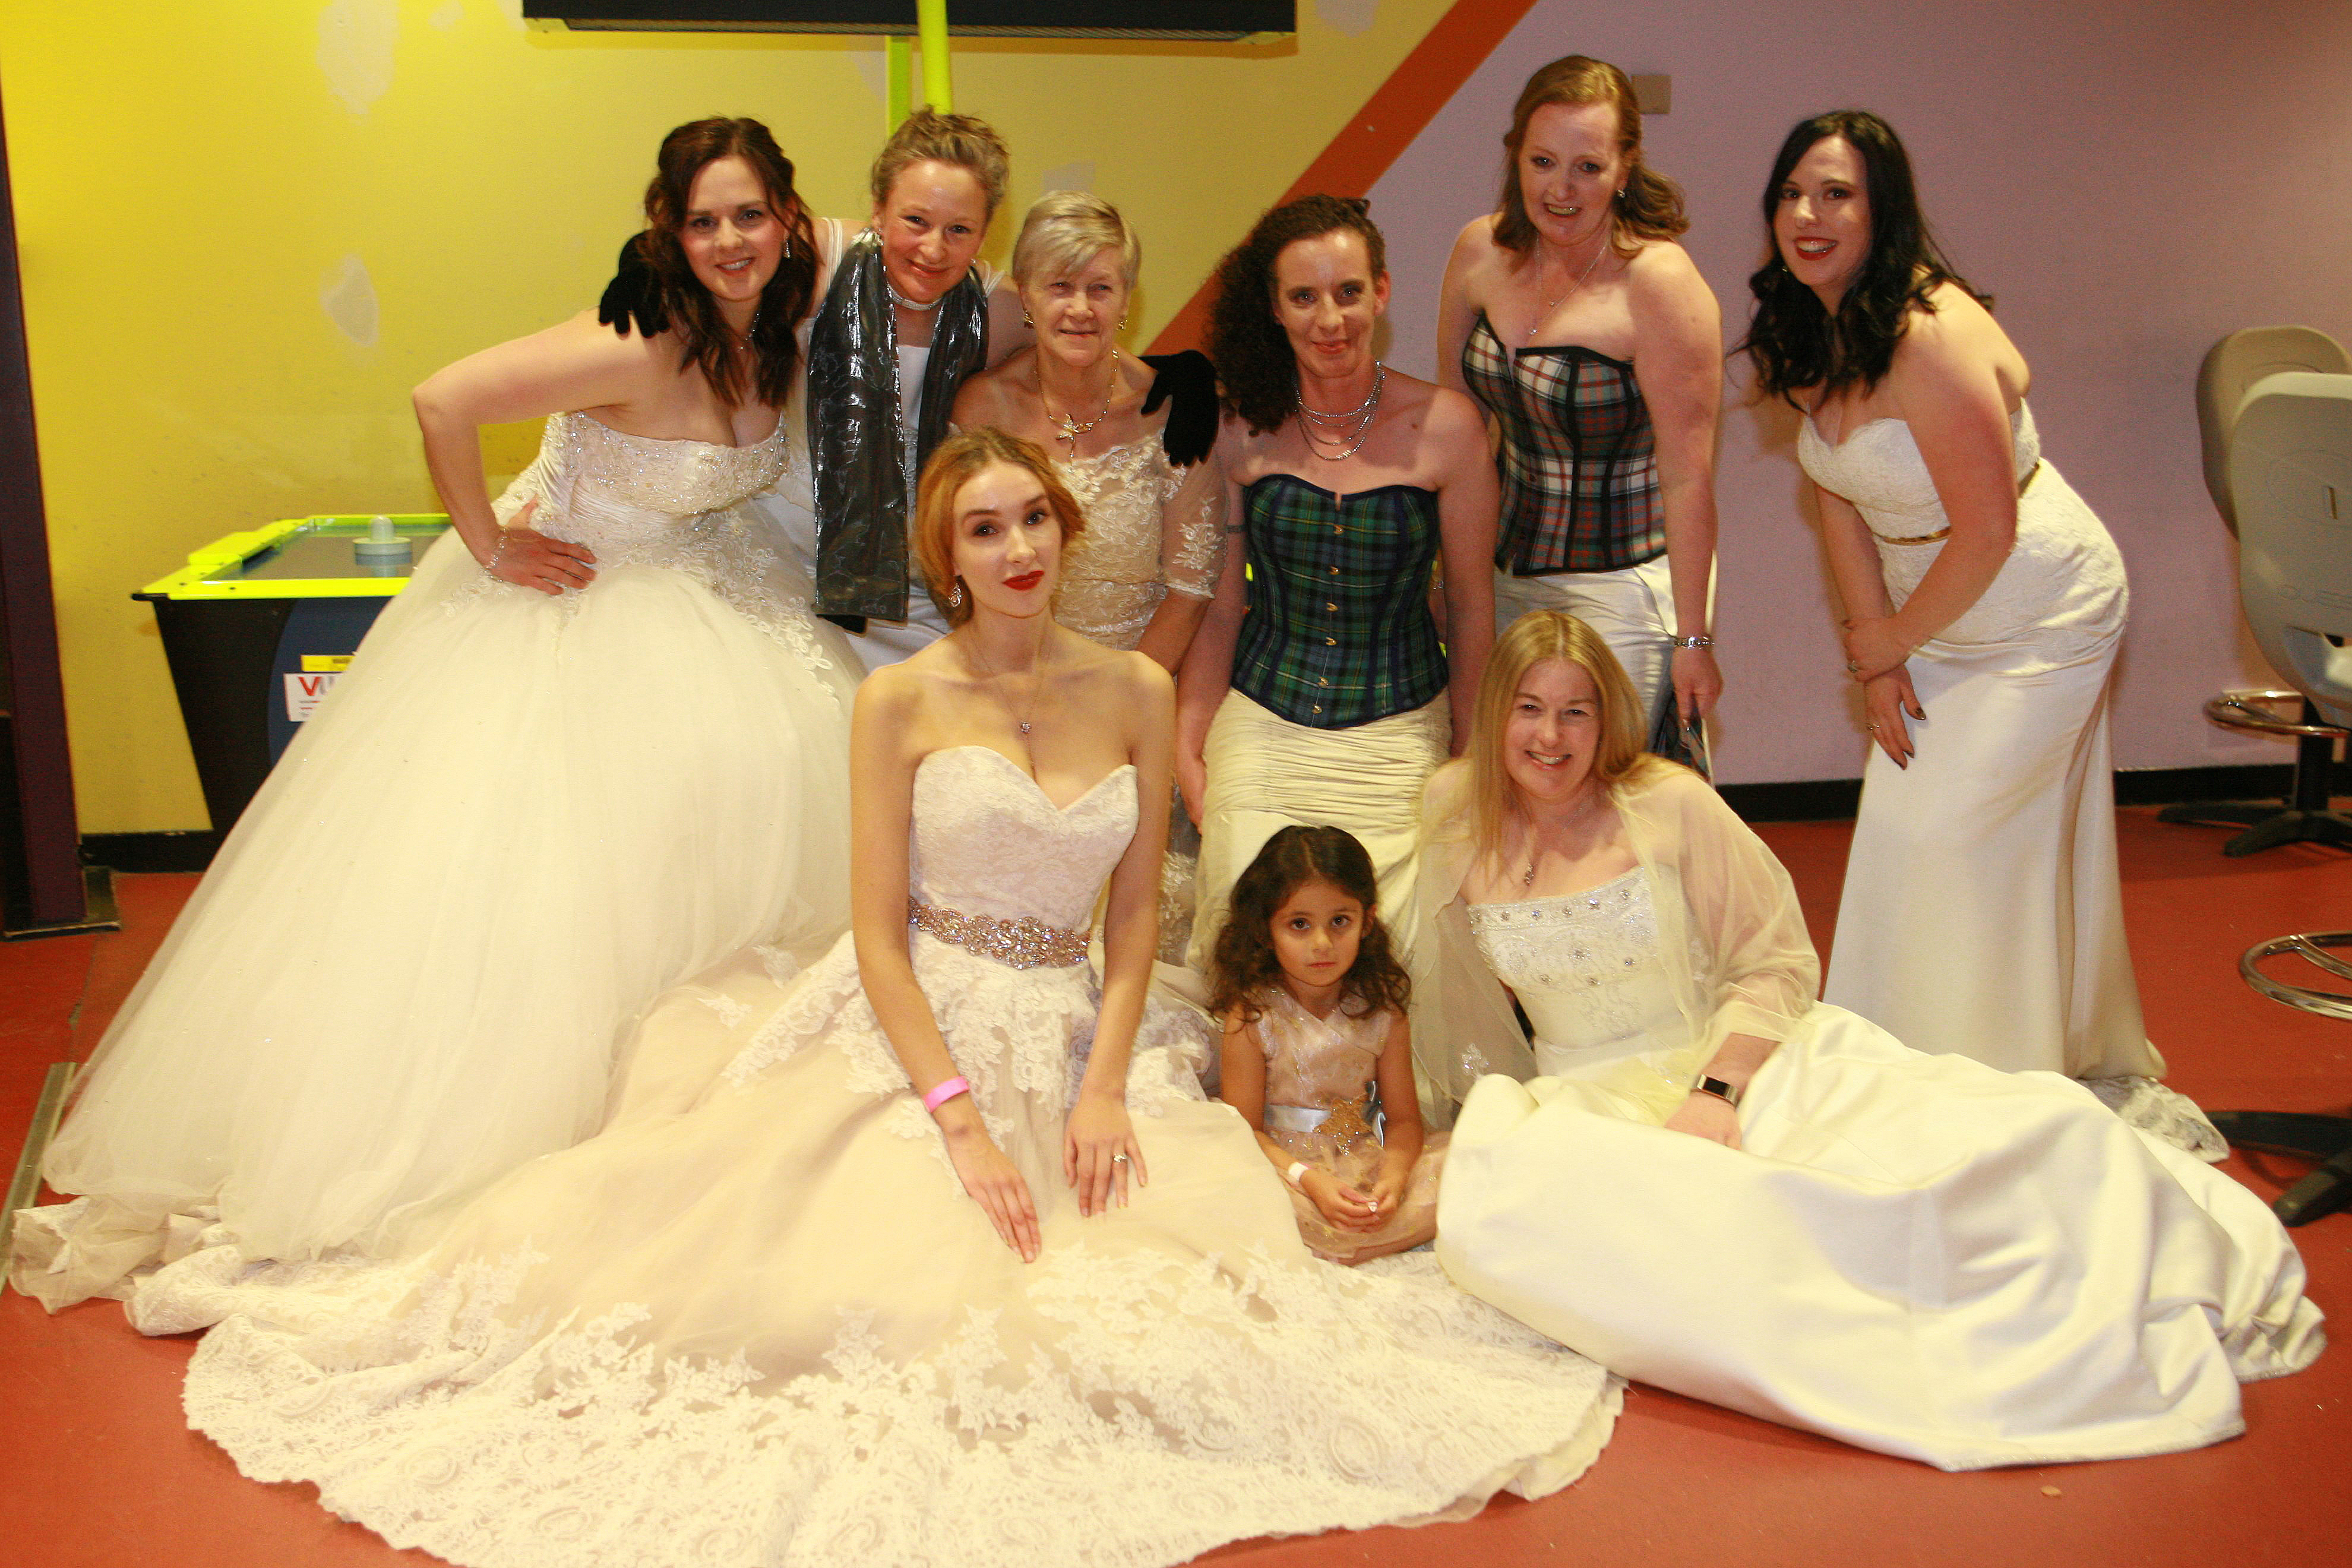 Ladies who got a chance to wear their wedding dress again at the Wedding Dress Ball in the Nevis Centre in Fort William.